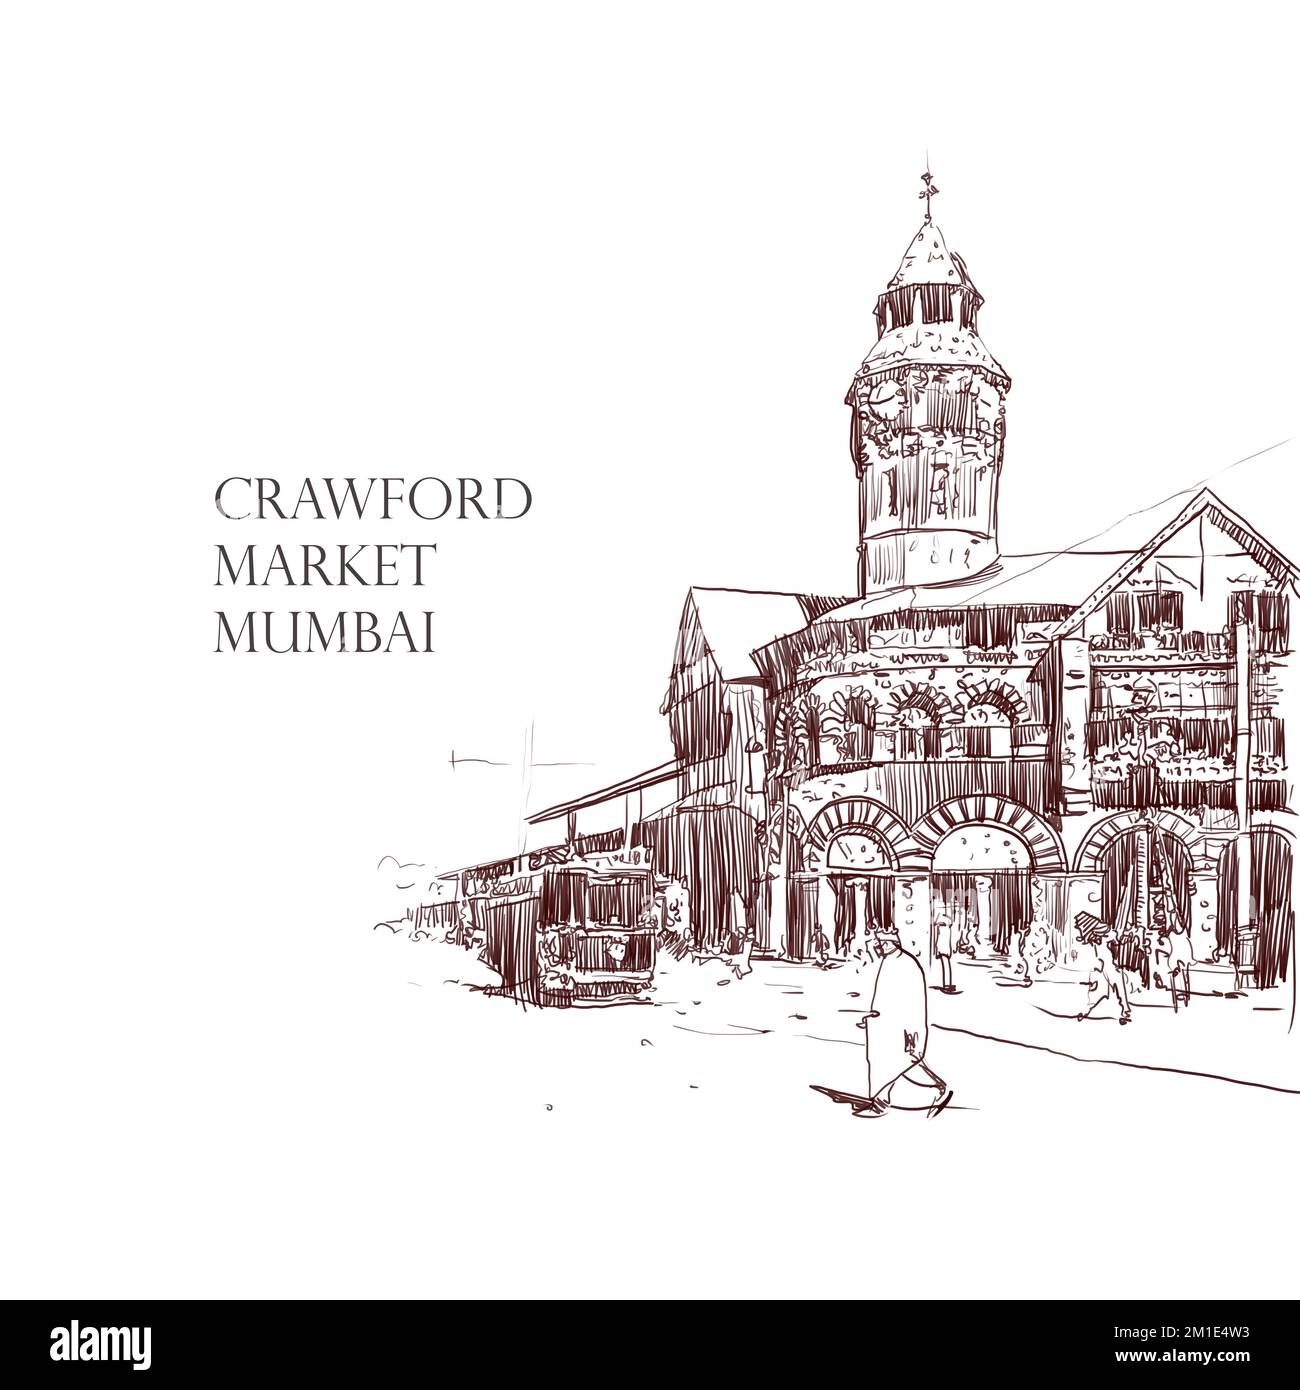 one of the oldest and most popular markets in Mumbai - Crawford market also known as Mahatma Jyotiba Phule Mandai illustration, Buildings & Architects Stock Photo